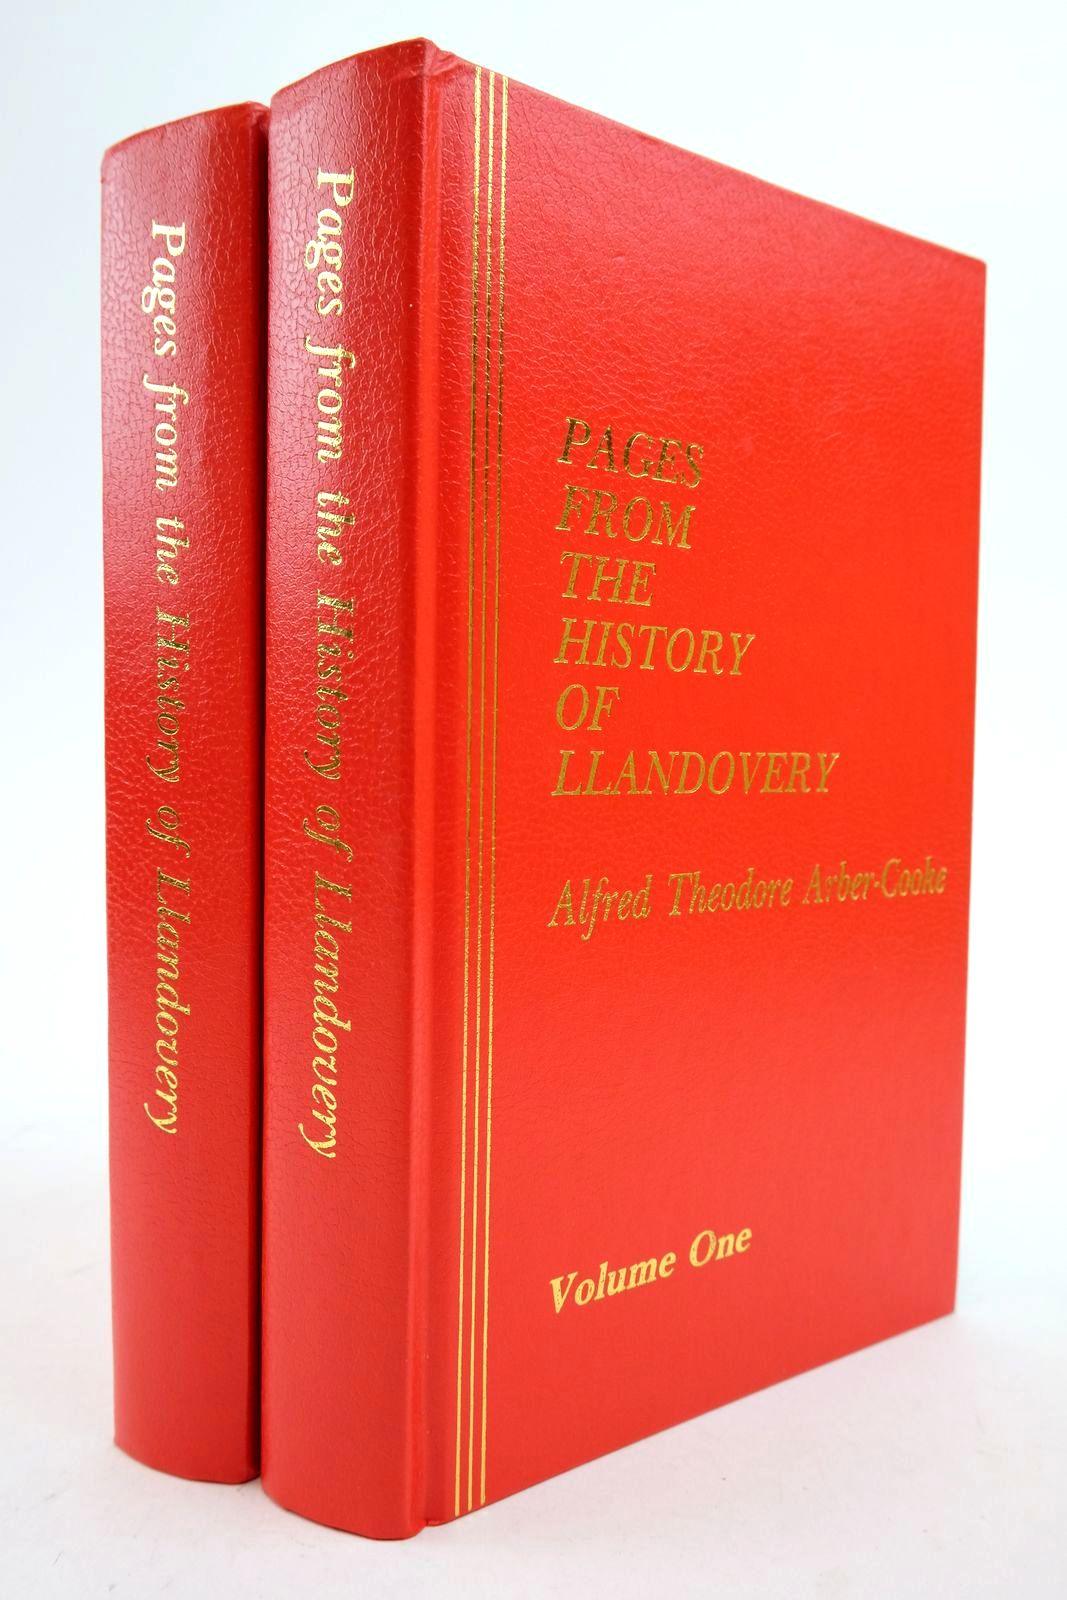 Photo of PAGES FROM THE HISTORY OF LLANDOVERY (2 VOLUMES) written by Arber-Cooke, Alfred Theodore published by Friends Of Llandovery Civic Trust Association (STOCK CODE: 2140376)  for sale by Stella & Rose's Books